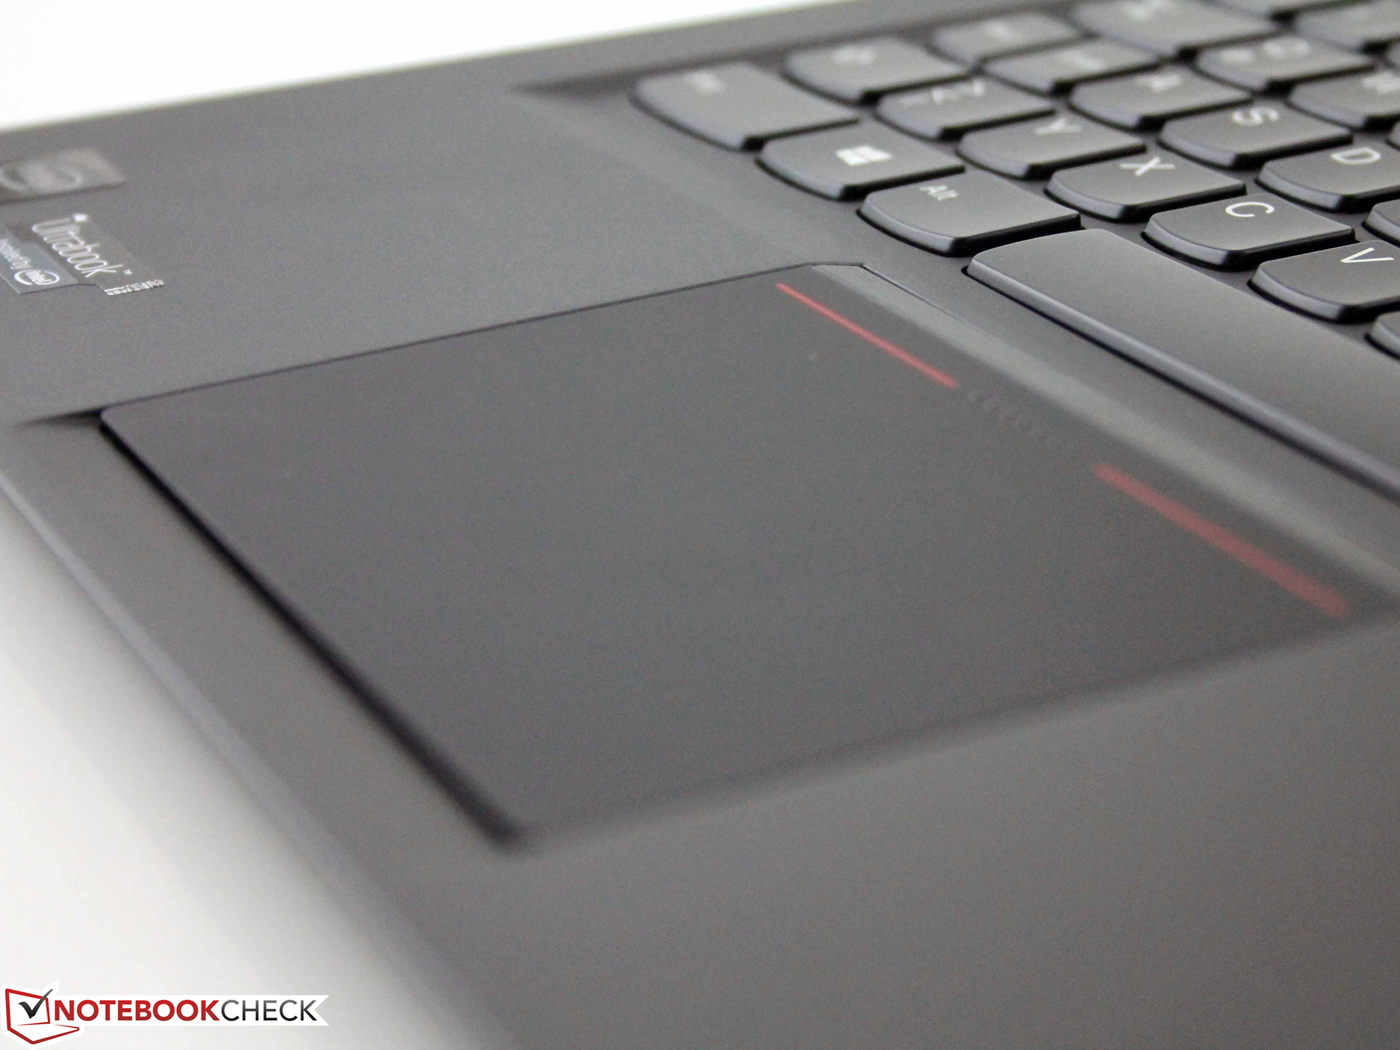 lenovo thinkpad x1 carbon touch review notebookcheck gpu